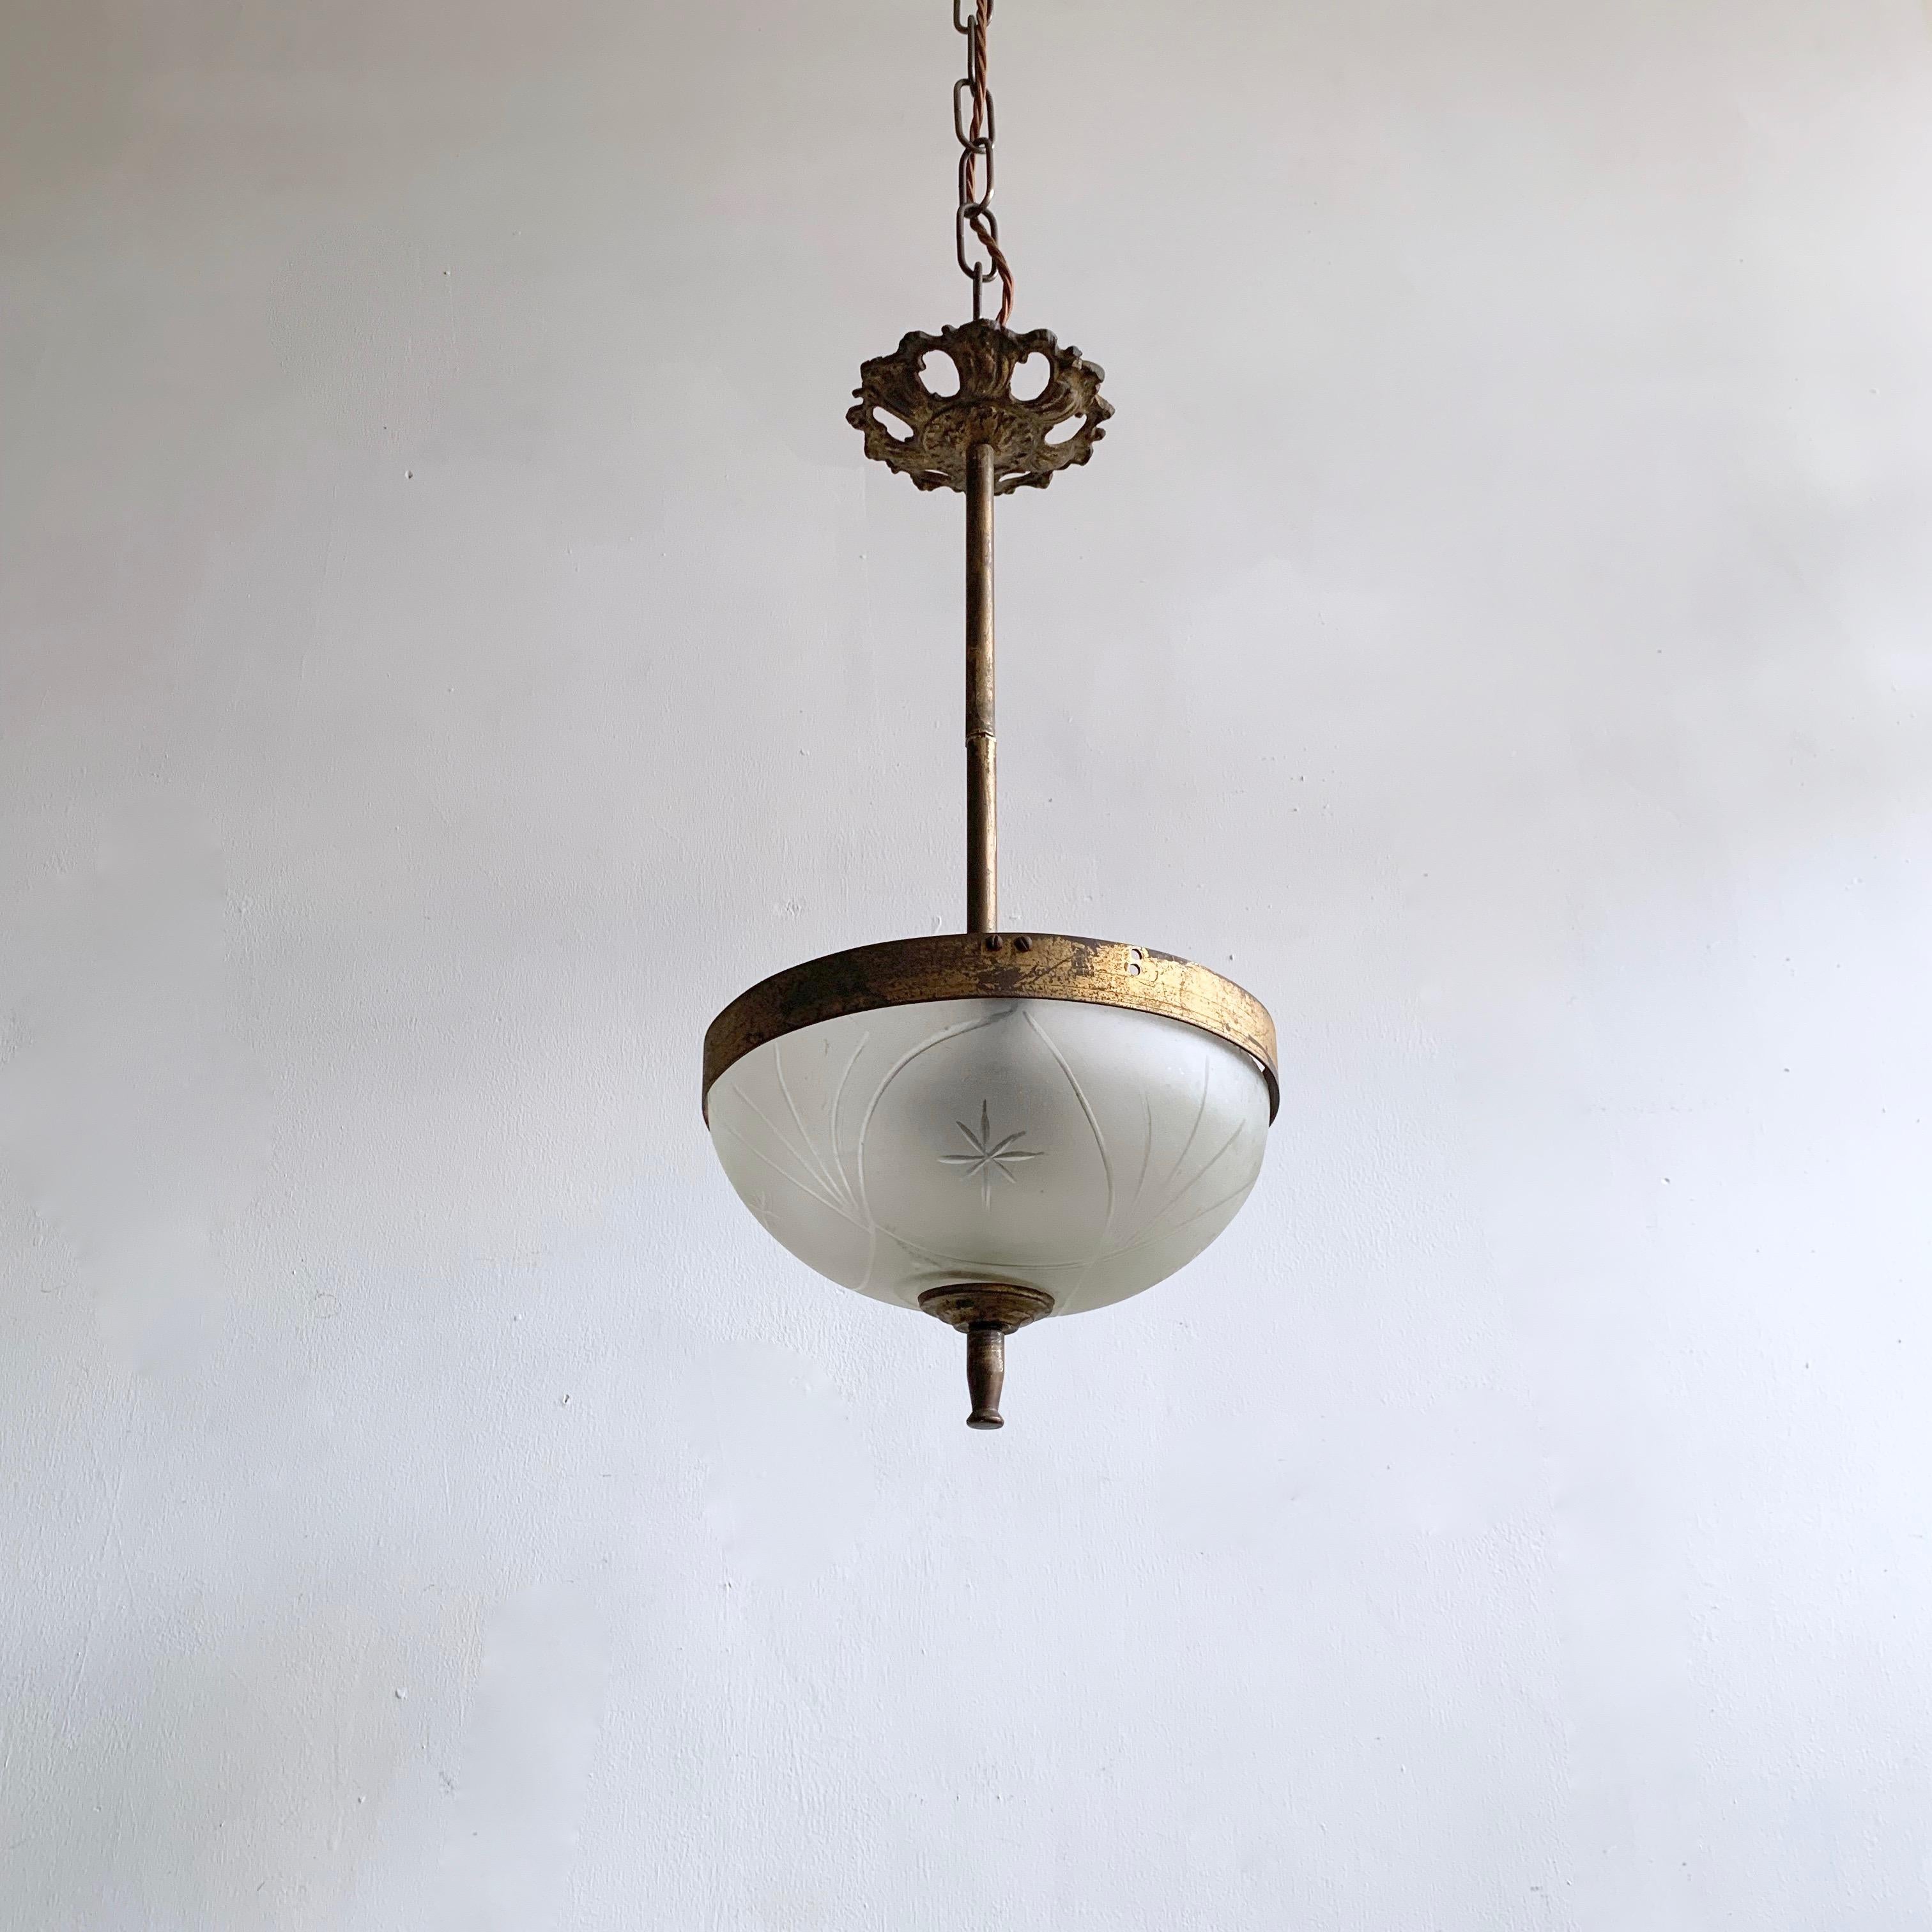 Delicate early 1900s French pendant with naturally aged brass frame and a frosted cut glass shade. Its small proportions would make it perfect for a hallway or landing space. The pendant comes supplied with braided flex, chain and a ceiling rose